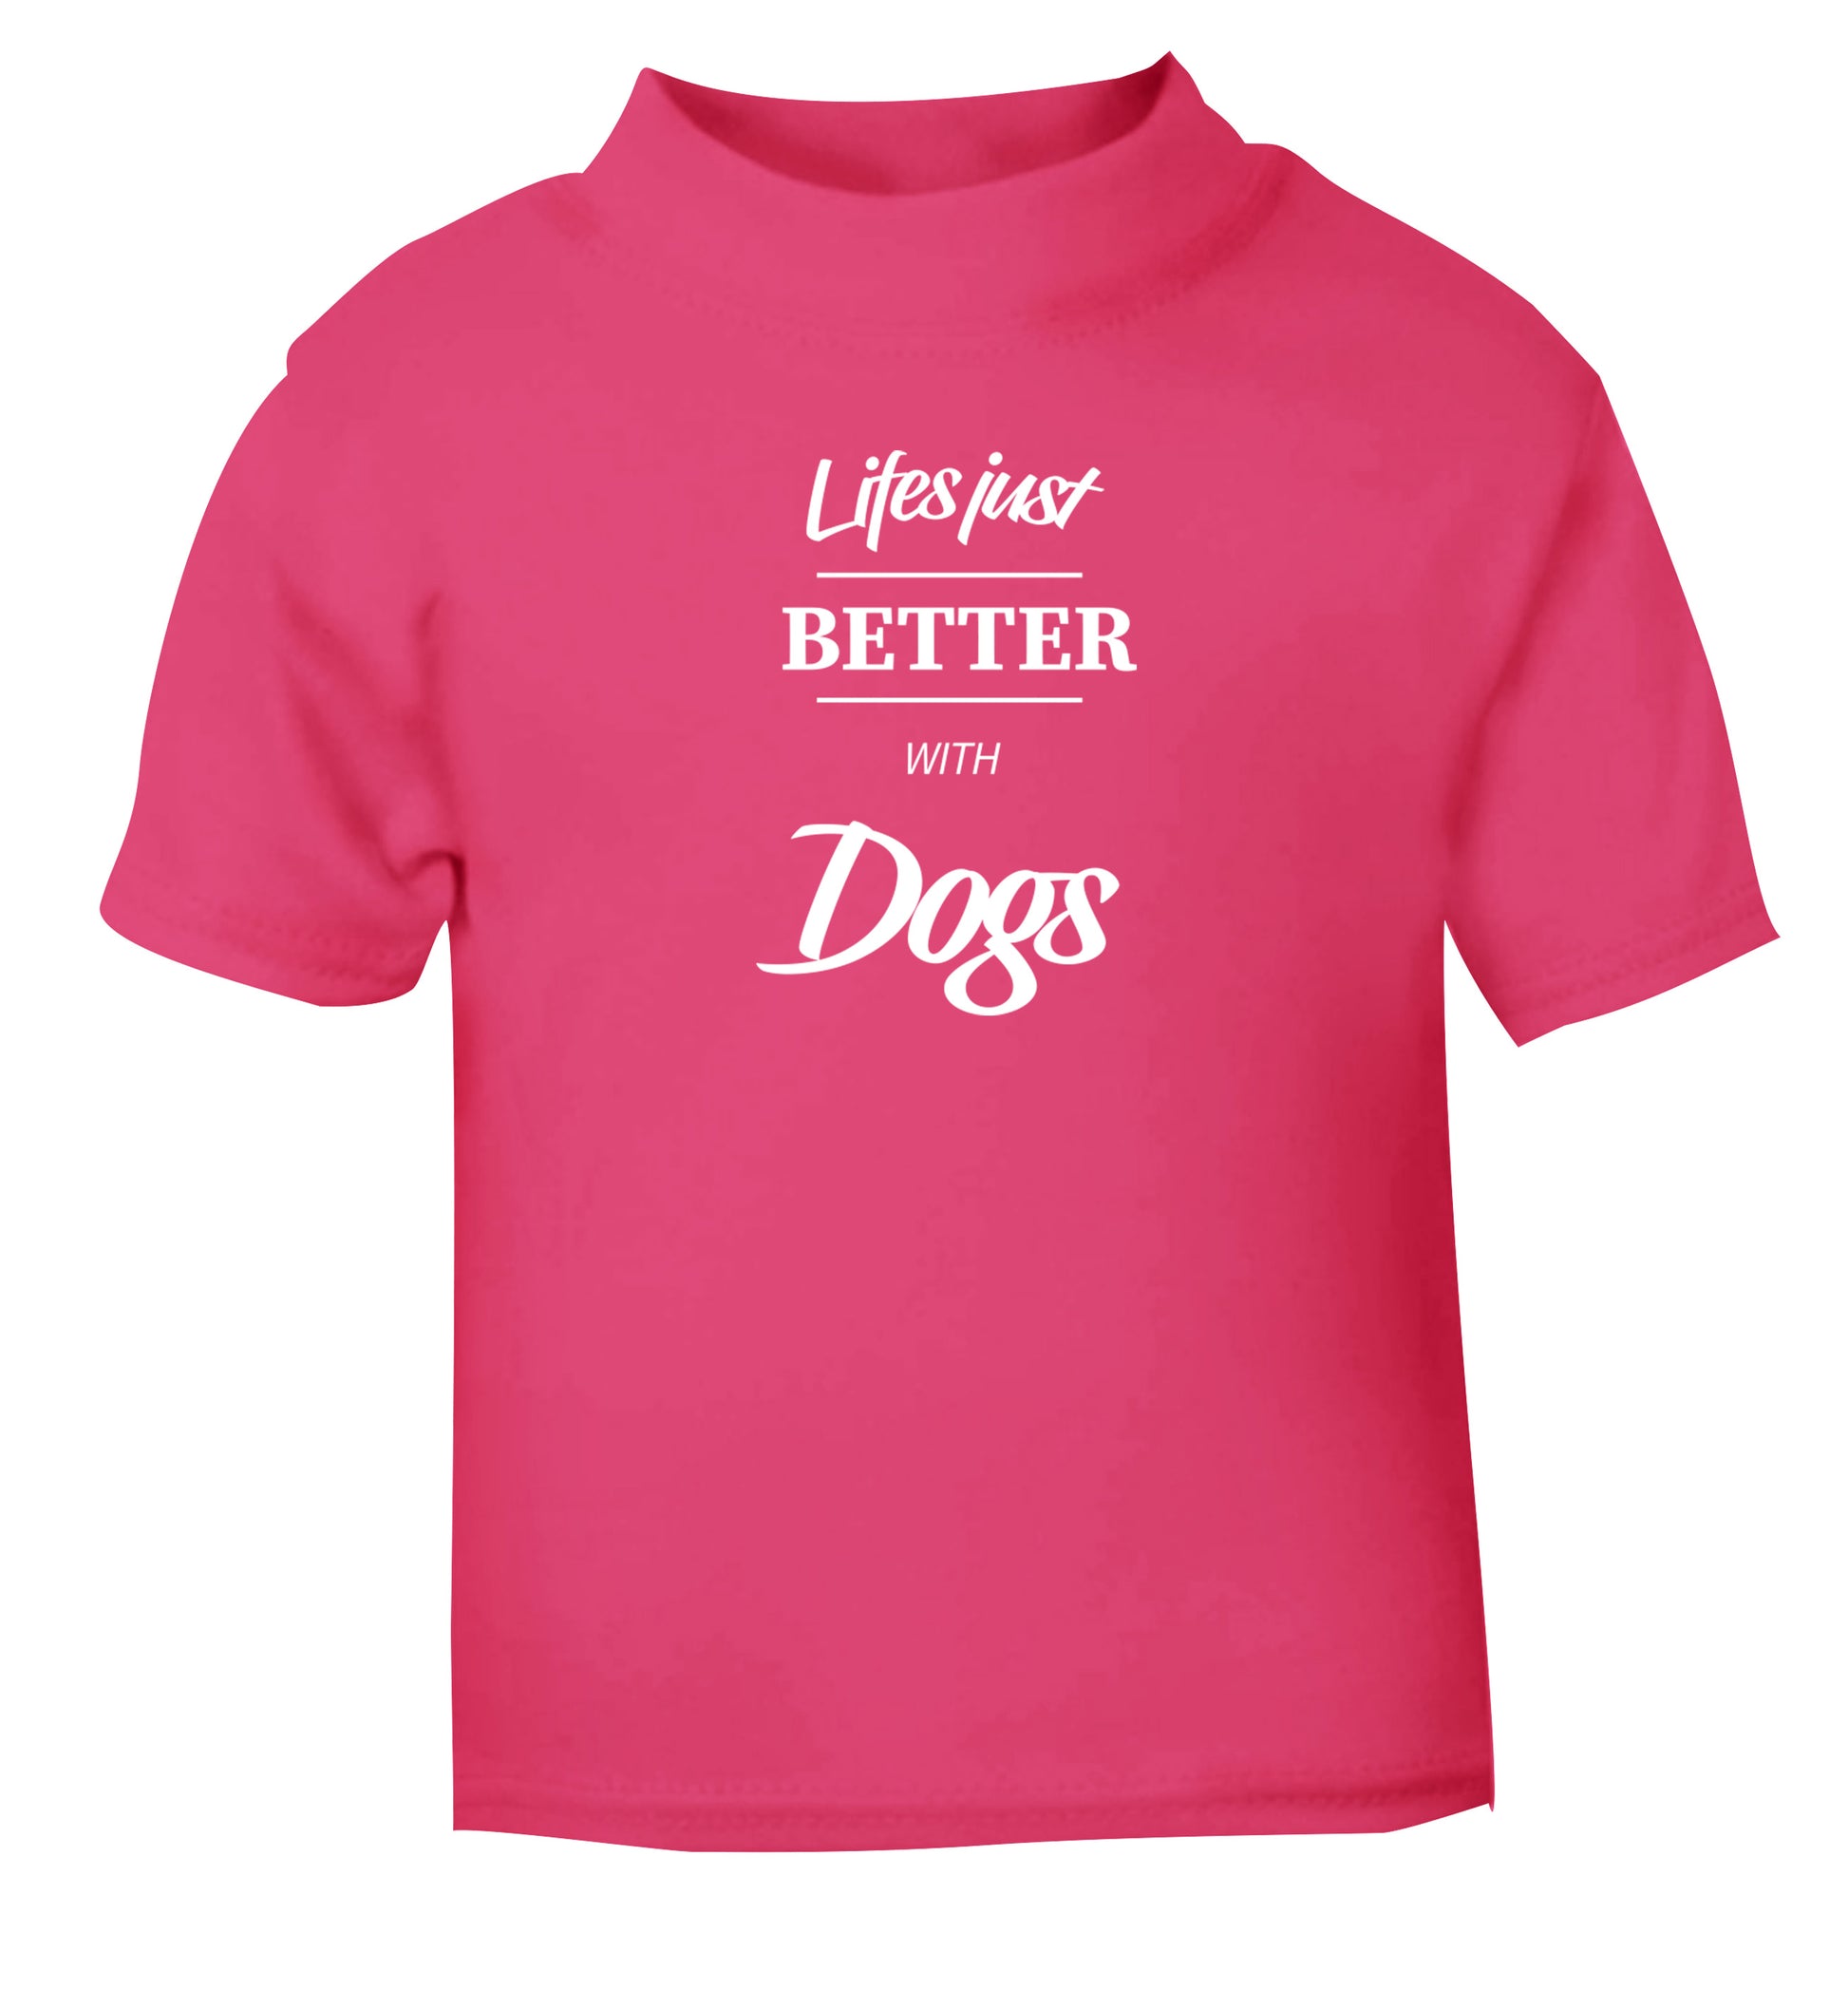 life is better with dogs pink Baby Toddler Tshirt 2 Years